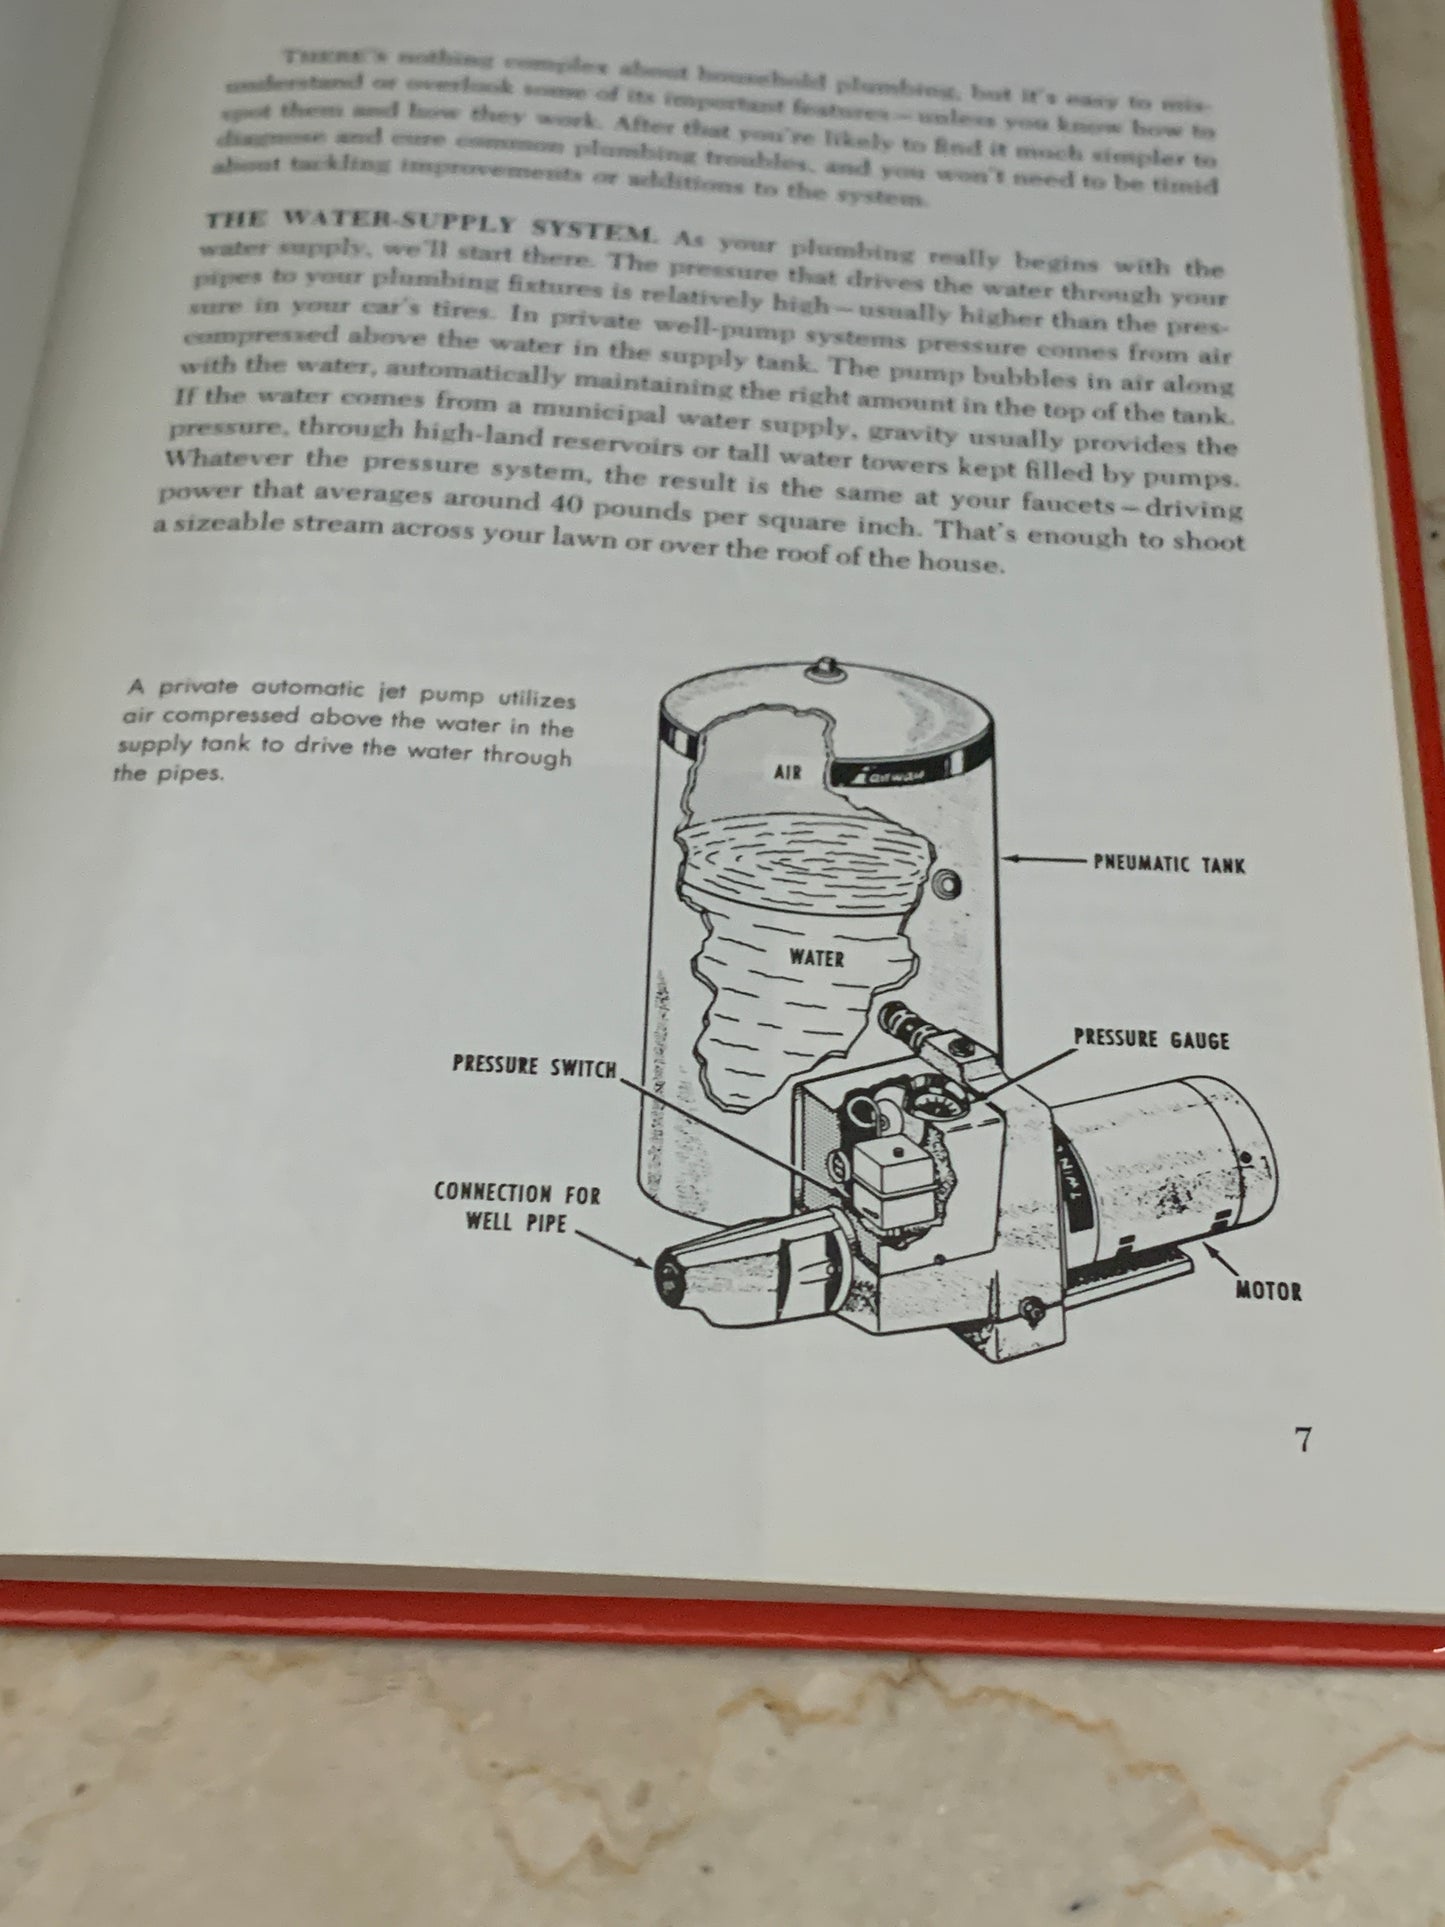 Plumbing, Heating, and Air Conditioning Vintage How to Book Home Improvement Book